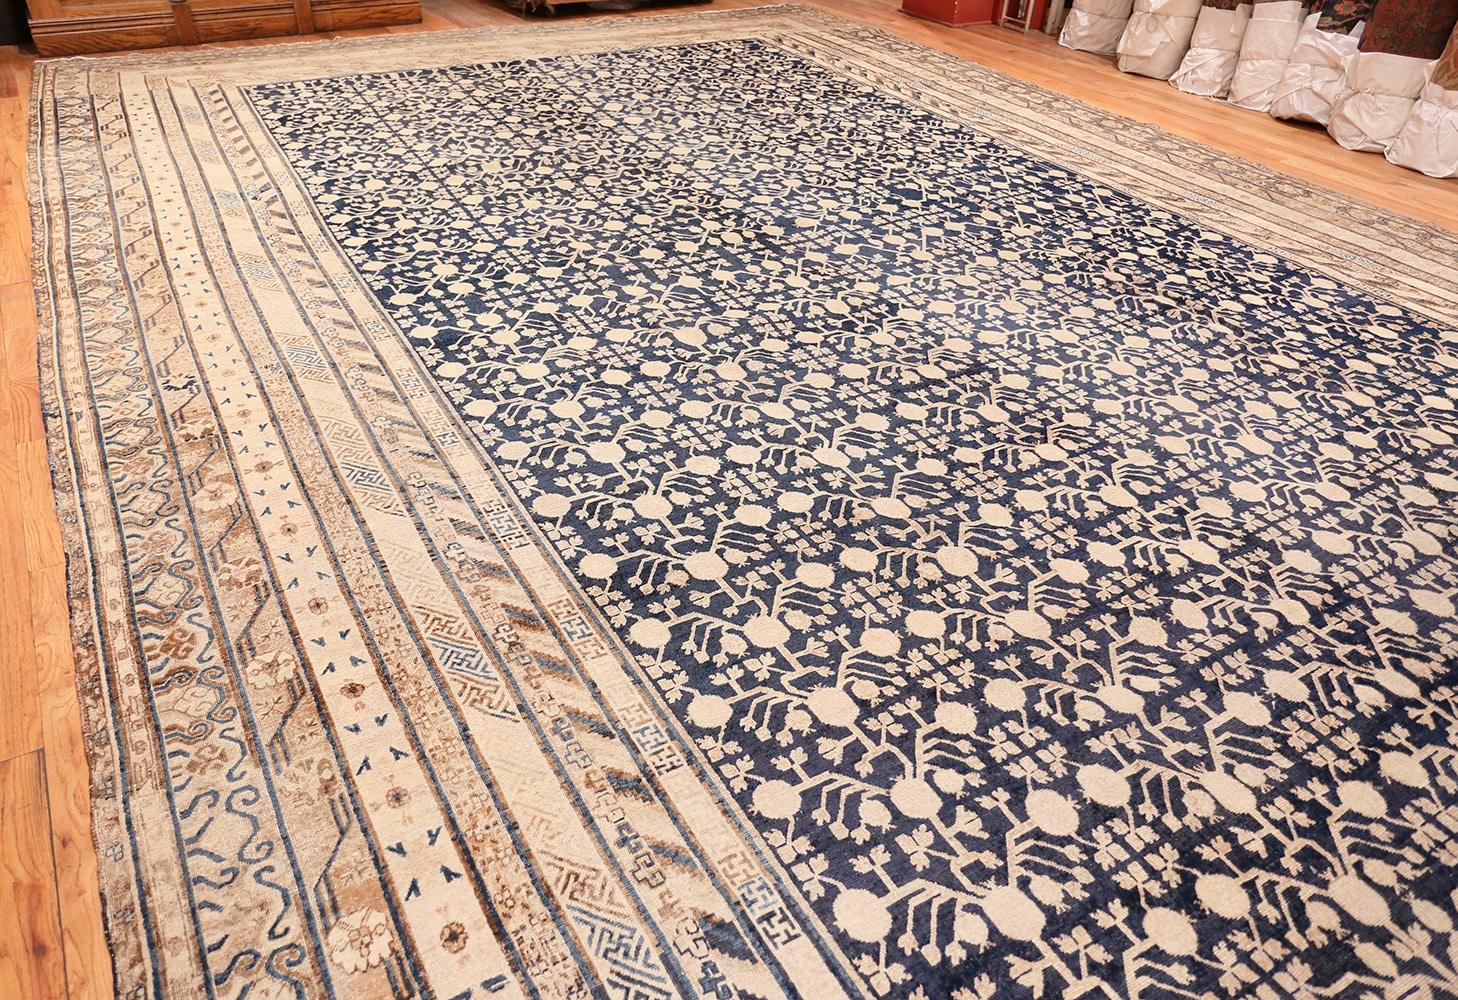 Very Rare and Breathtakingly Beautiful Oversized Antique Pomegranate Design Khotan Rug, Country of Origin: East Turkestan, Circa Date: 1900. Size: 16 ft x 24 ft 6 in (4.88 m x 7.47 m)

The high contrast ground of this exquisite antique East